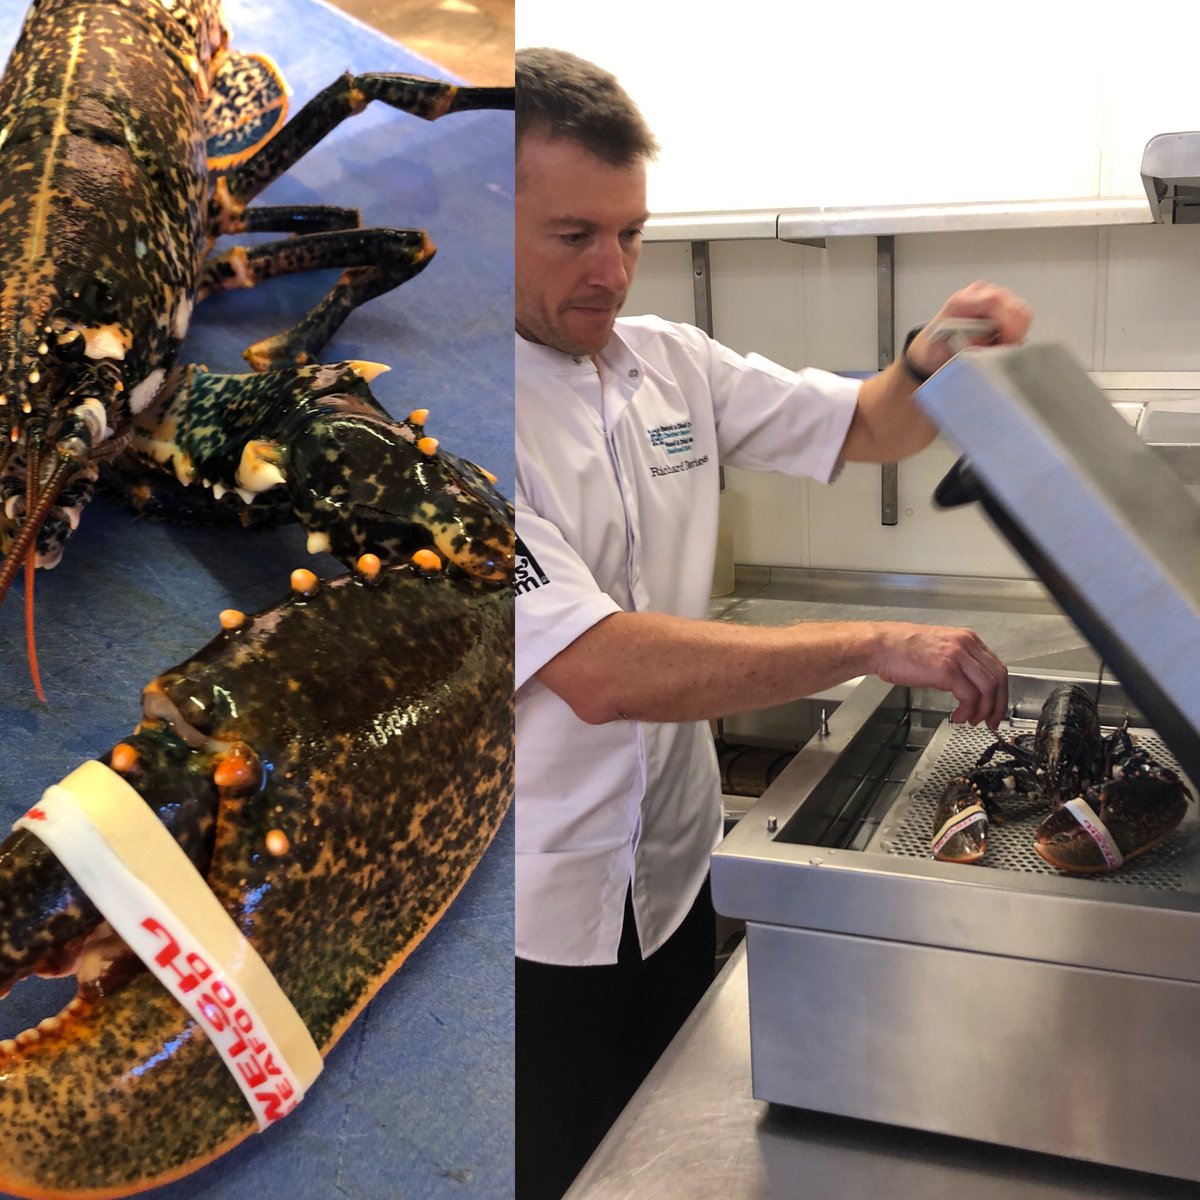 Richard Davies @Calcot_and_Spa preparing some beautiful Welsh lobsters @ClwstwrBwydMor @menterabusnes #welshseafood from @lockdownlobster #lovewelshseafood being humanely dispatched using the @Crustastun from @mitchellcooper